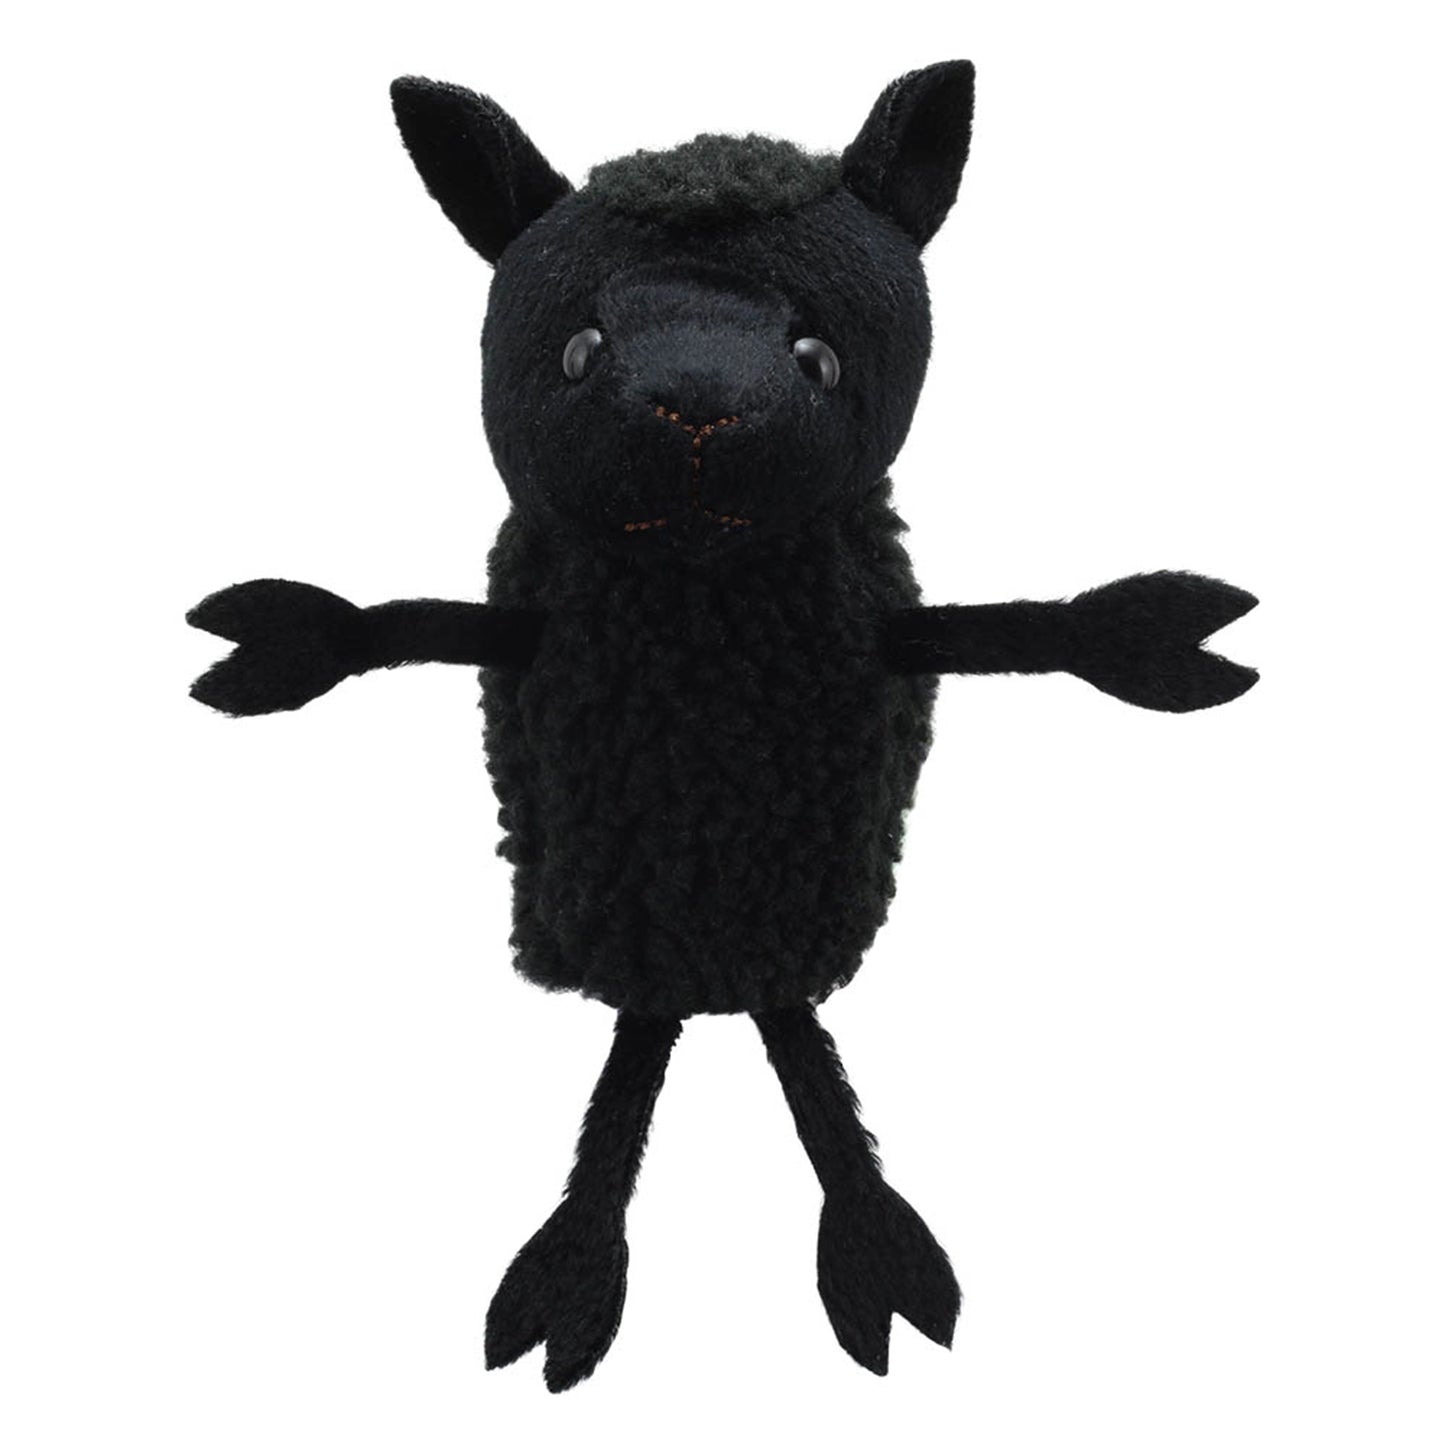 Sheep (Black) Finger Puppet - The Puppet Company - The Forgotten Toy Shop